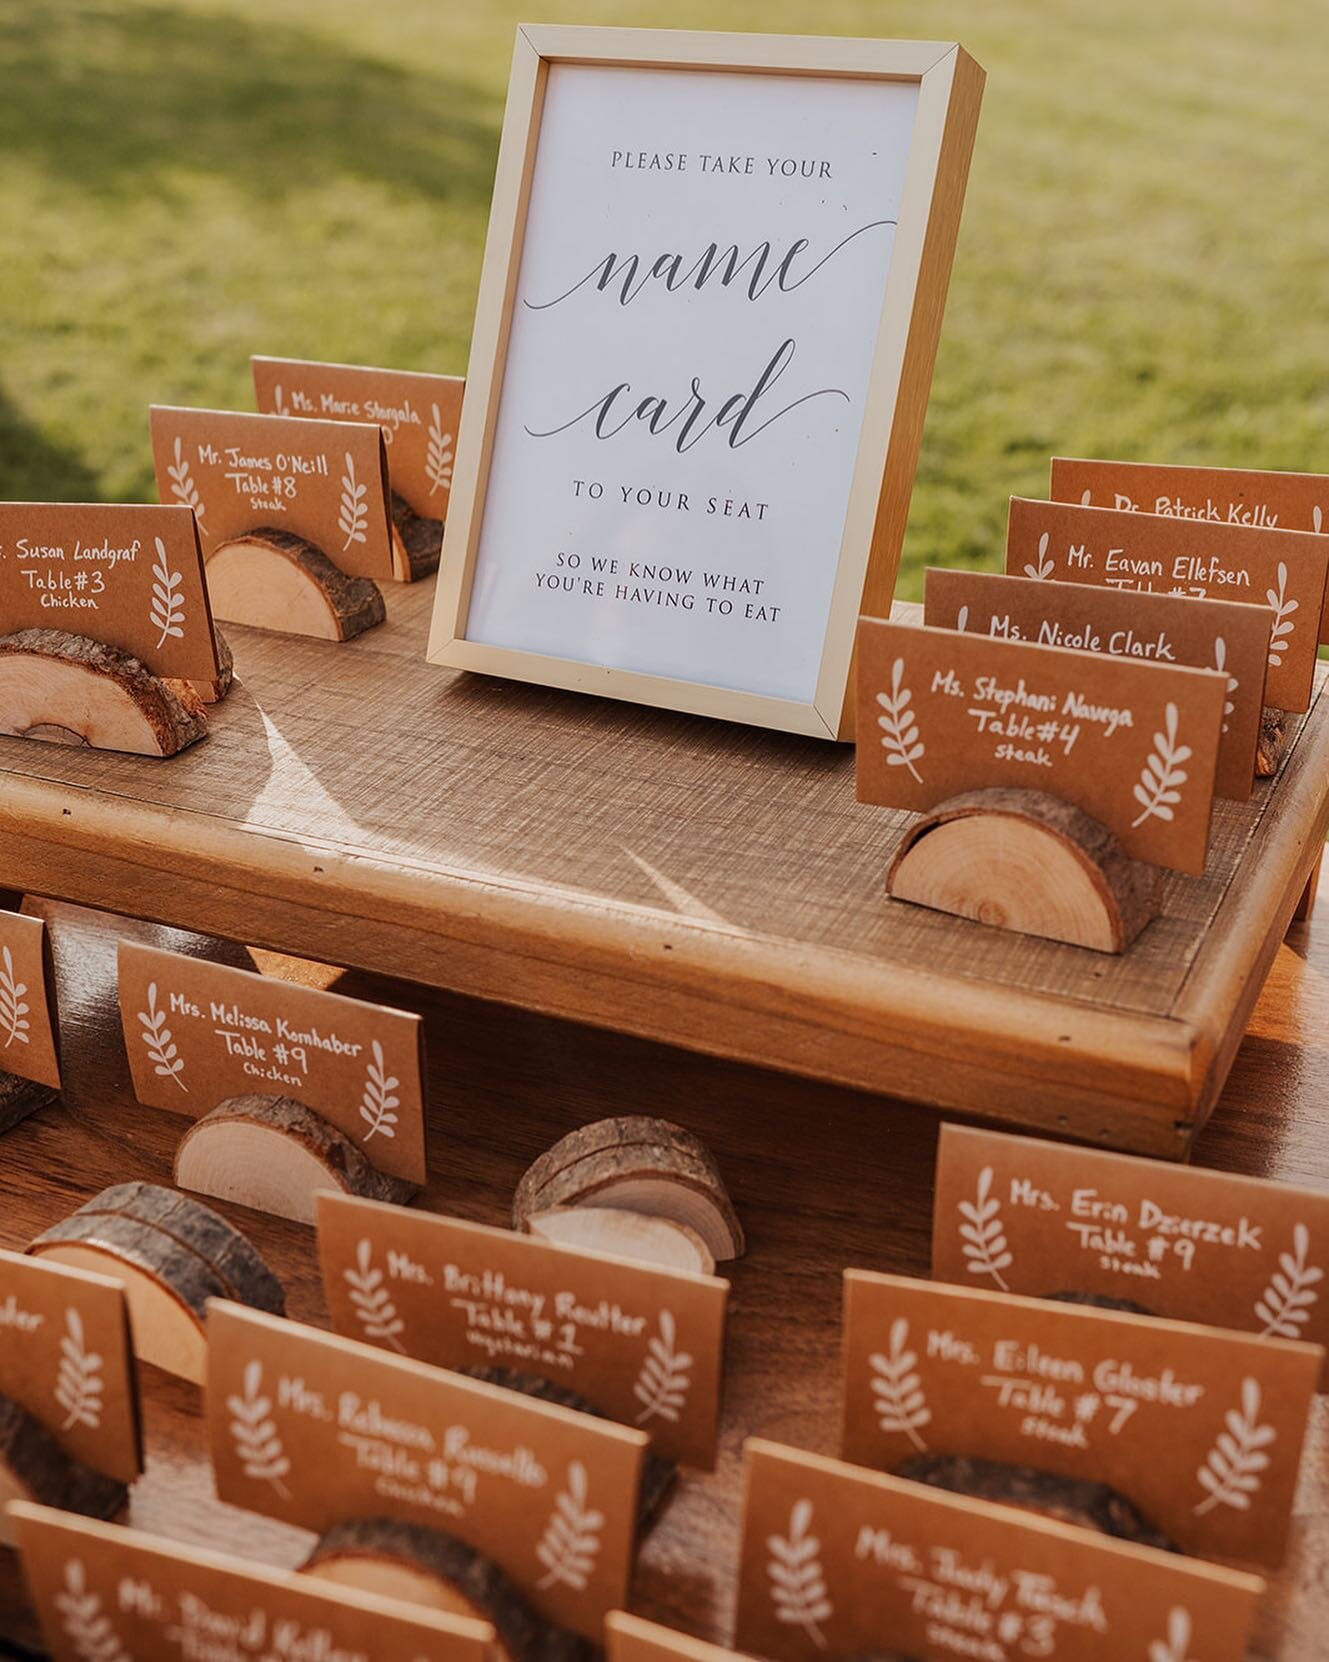 Place card holders on theme for this fall barn wedding 🪵 🤍

📸: @alexandjullyphotography 
Venue: @indianridgepreserve 
Planner: @tayloredevents.co 
Catering: @millhousebrewingco